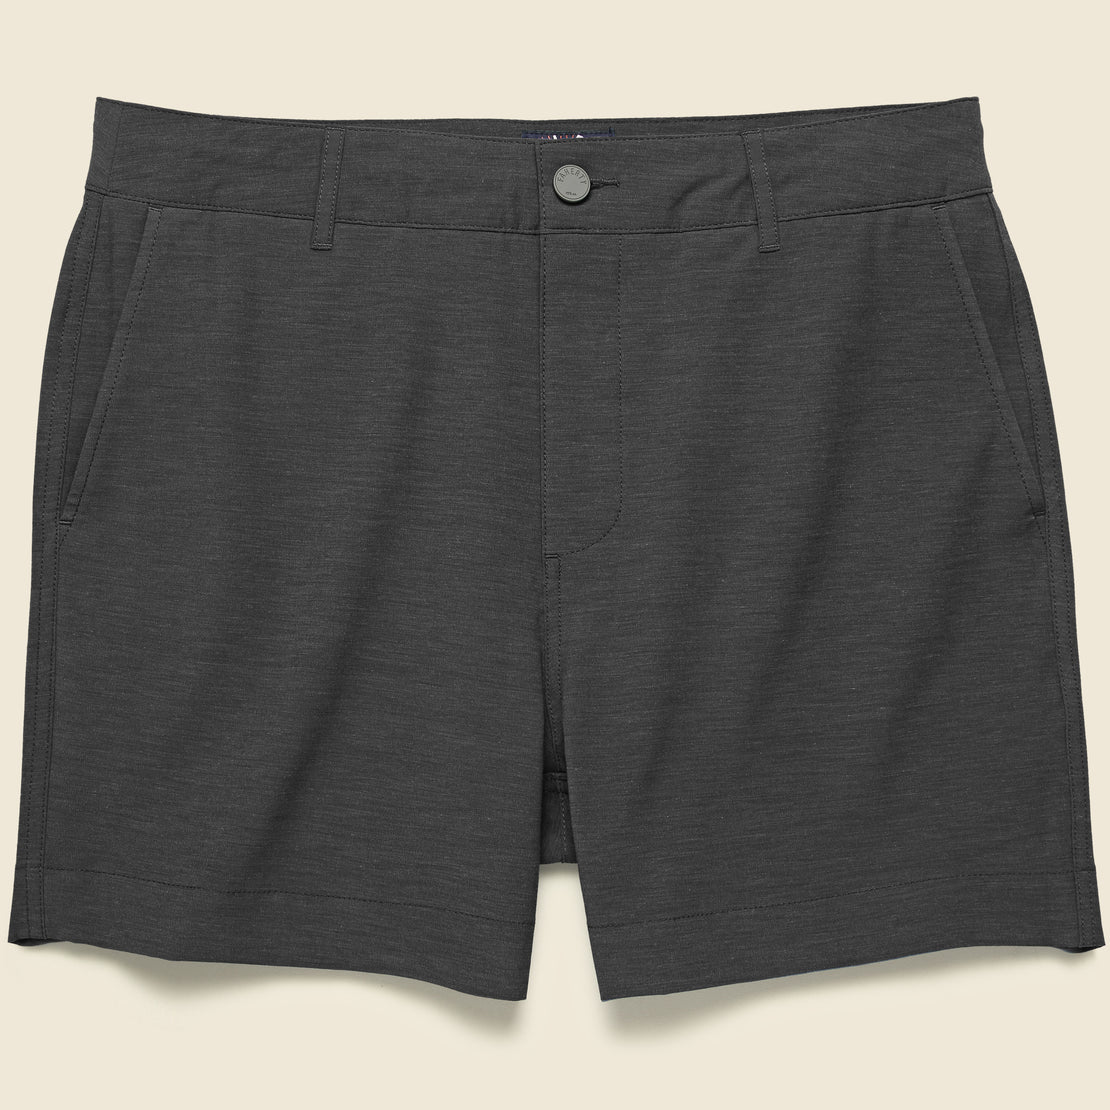 Faherty Belt Loop All Day Short 5-inch - Charcoal